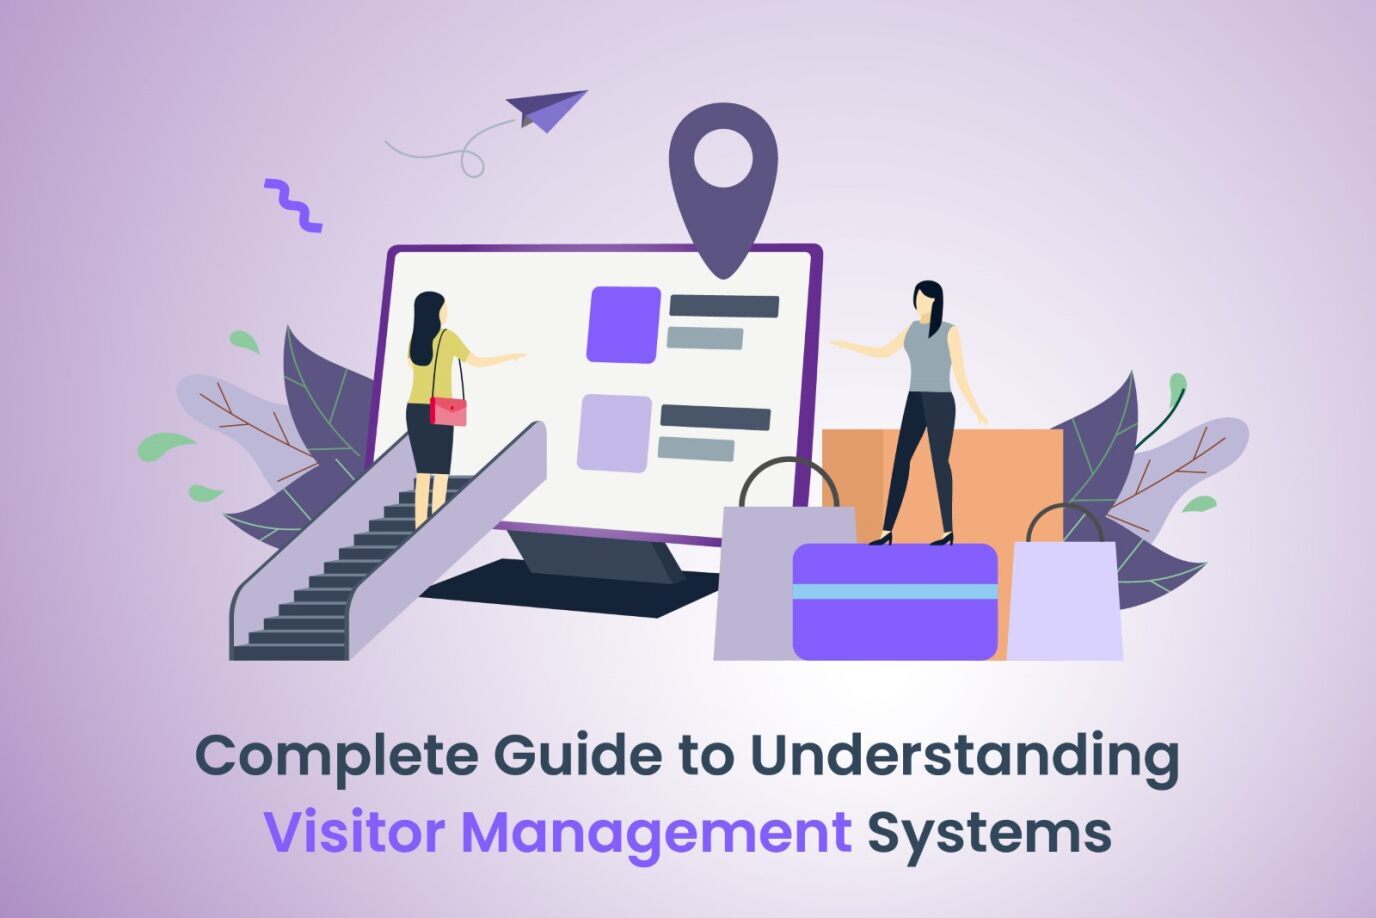 Complete Guide to Understanding Visitor Management Systems